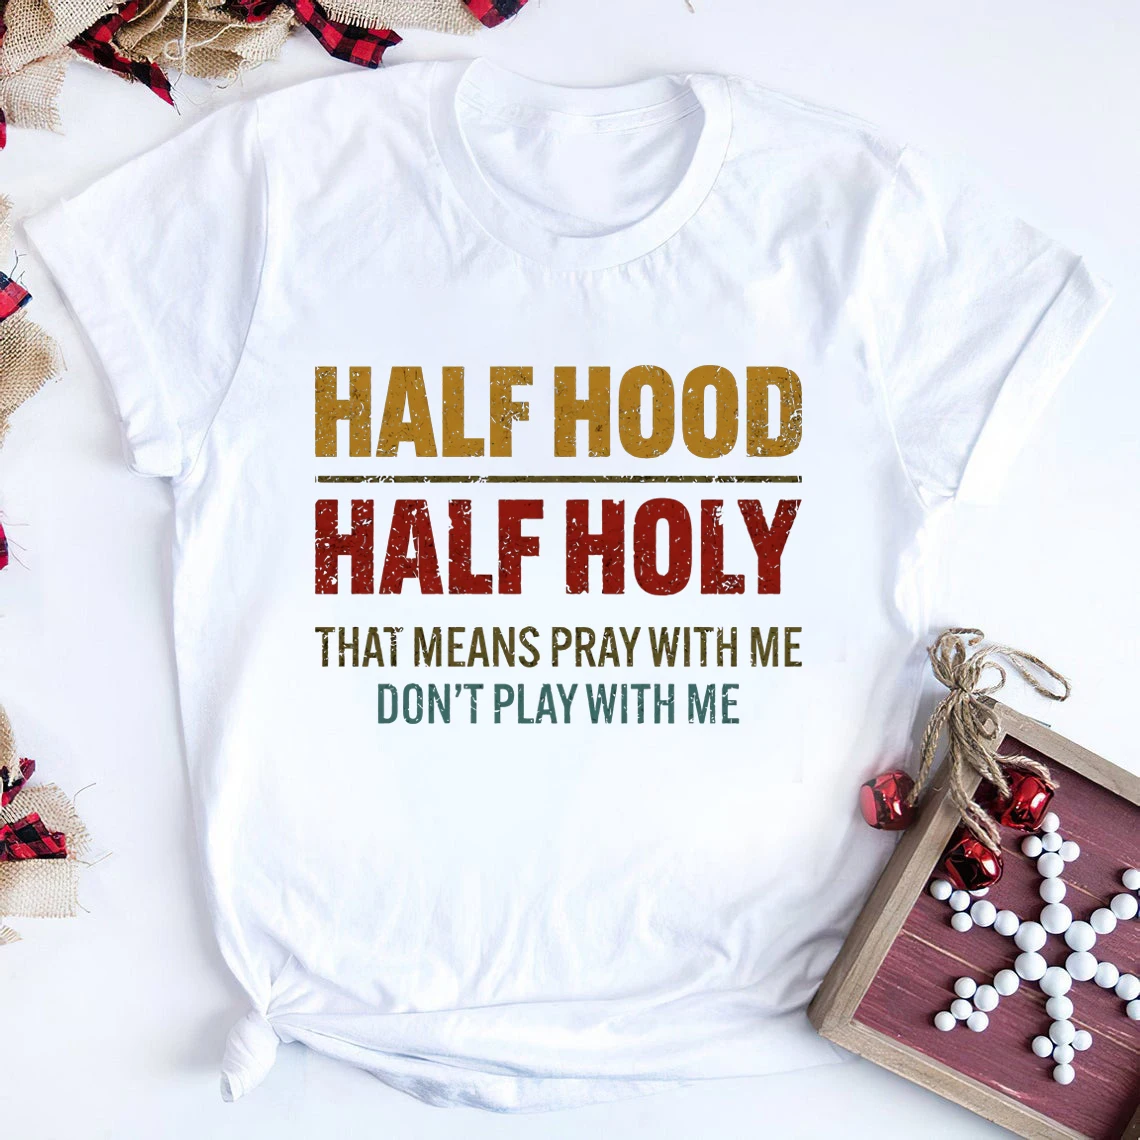 

Half Hood Half Holy Holy Shirt That Means Pray with Me Sarcastic Shirts Vintage Graphic Tee Retro Quotes T-shirt Plus Size Tees